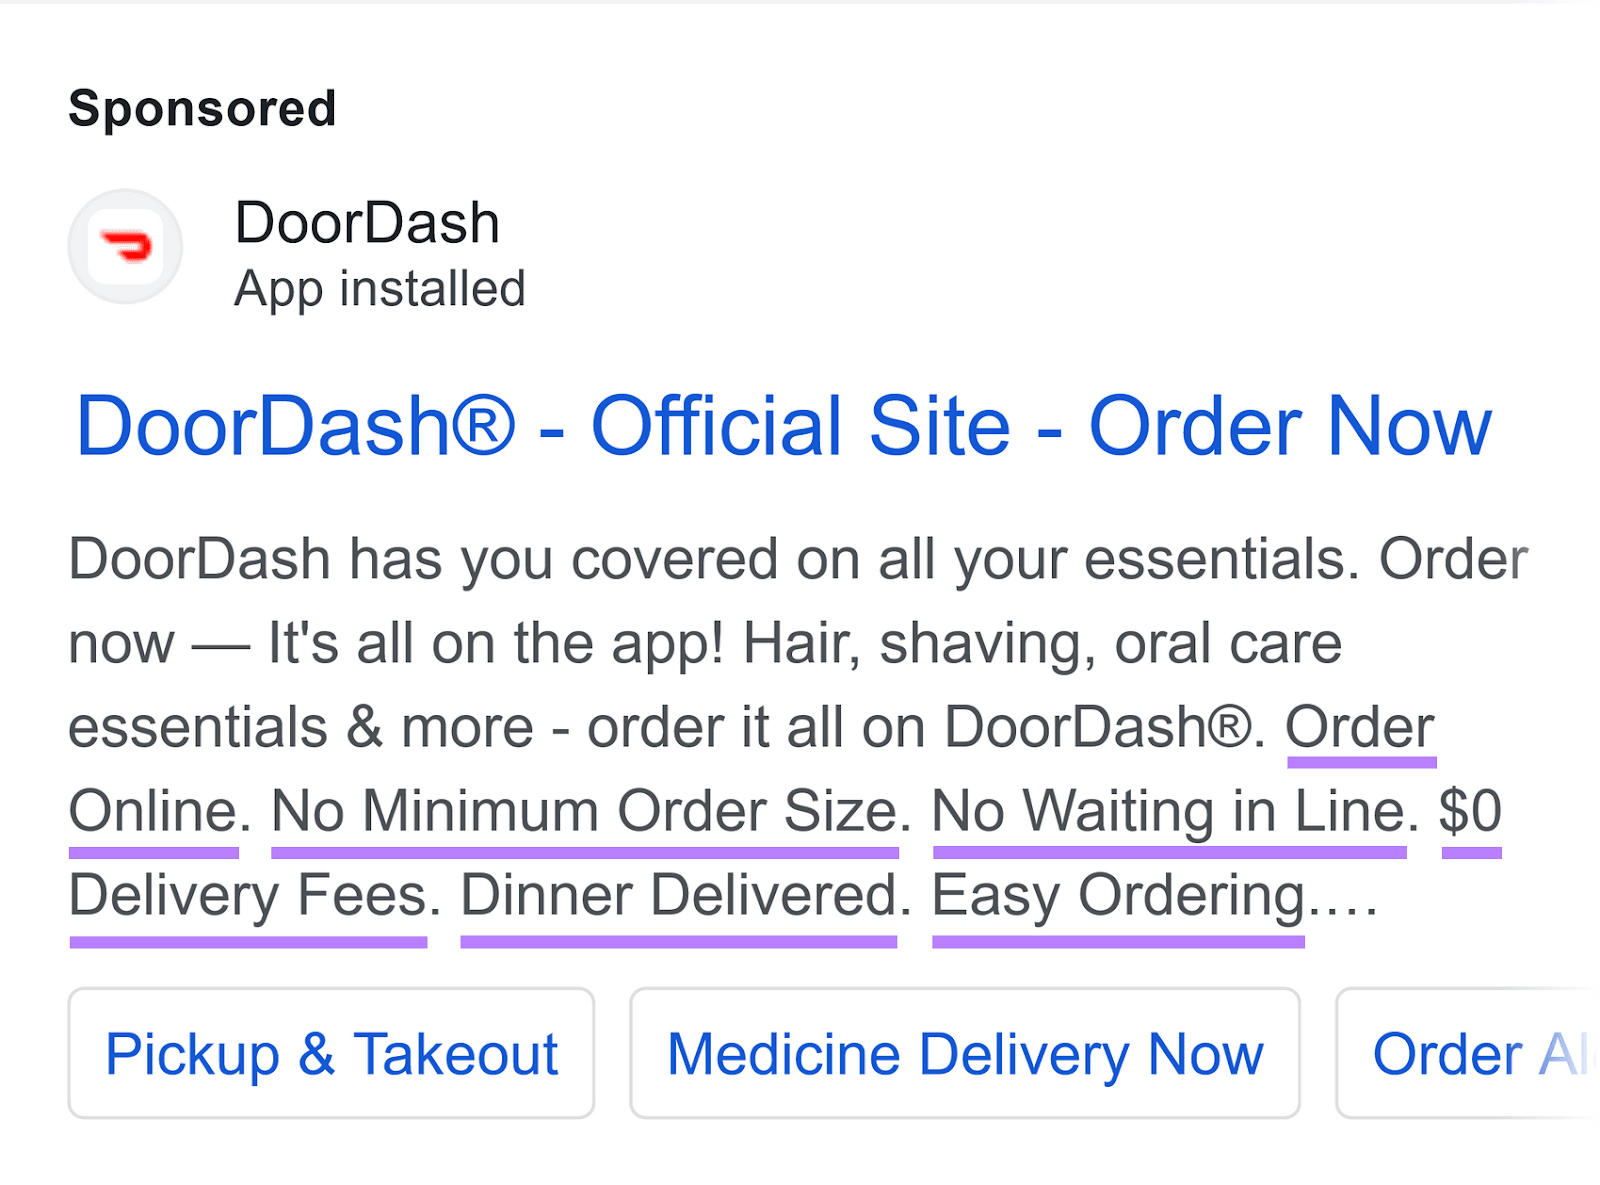 DoorDash's ad on Google SERP with a callout asset